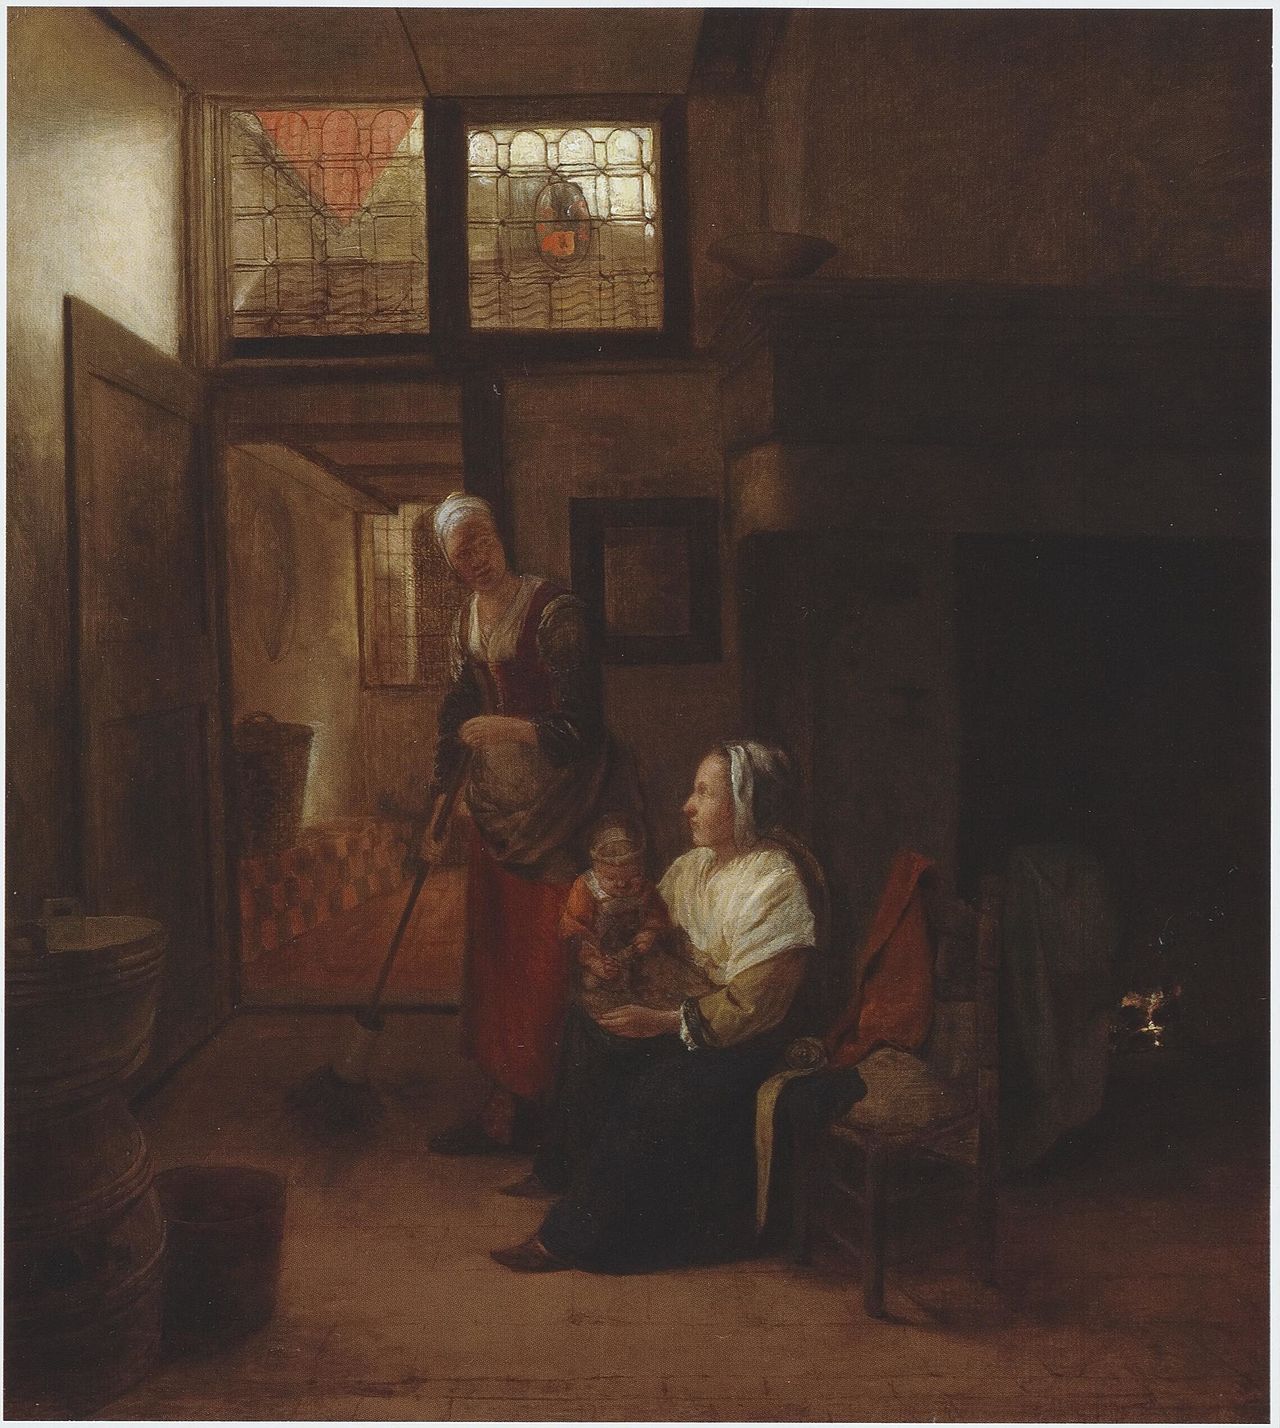 Pieter de Hooch - Interior with mother and child and a maid sweeping ca. 1655-1657